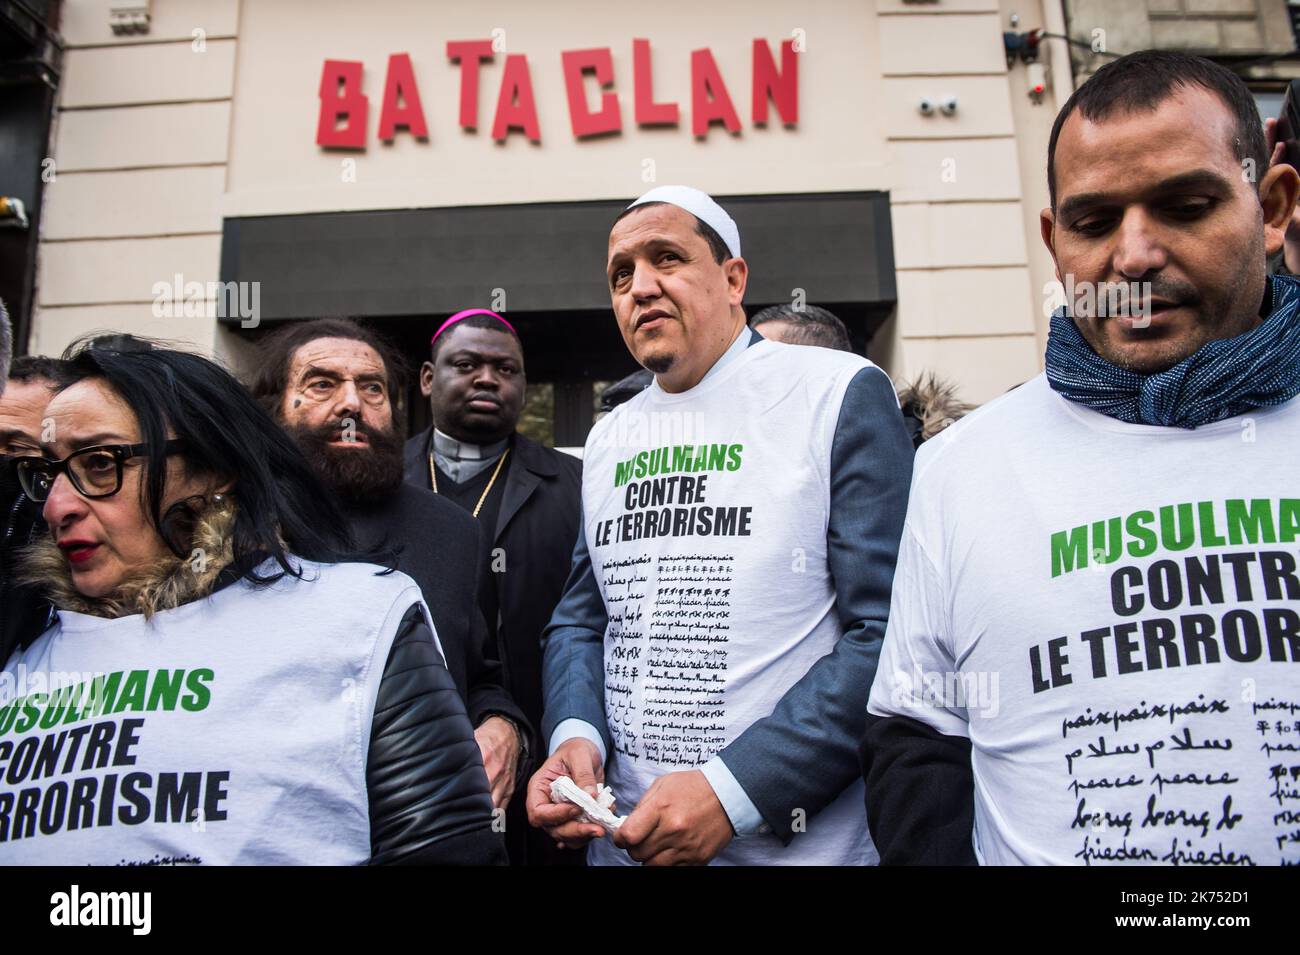 Imam Hassen Chalghoumi (R) and French author Marek Halter (L) gather with a group dubbed 'Muslims against Terrorism'  in front of the  Bataclan concert venue during a ceremony marking the second anniversary of the Paris attacks of November 2015 in which 130 people were killed.  Stock Photo